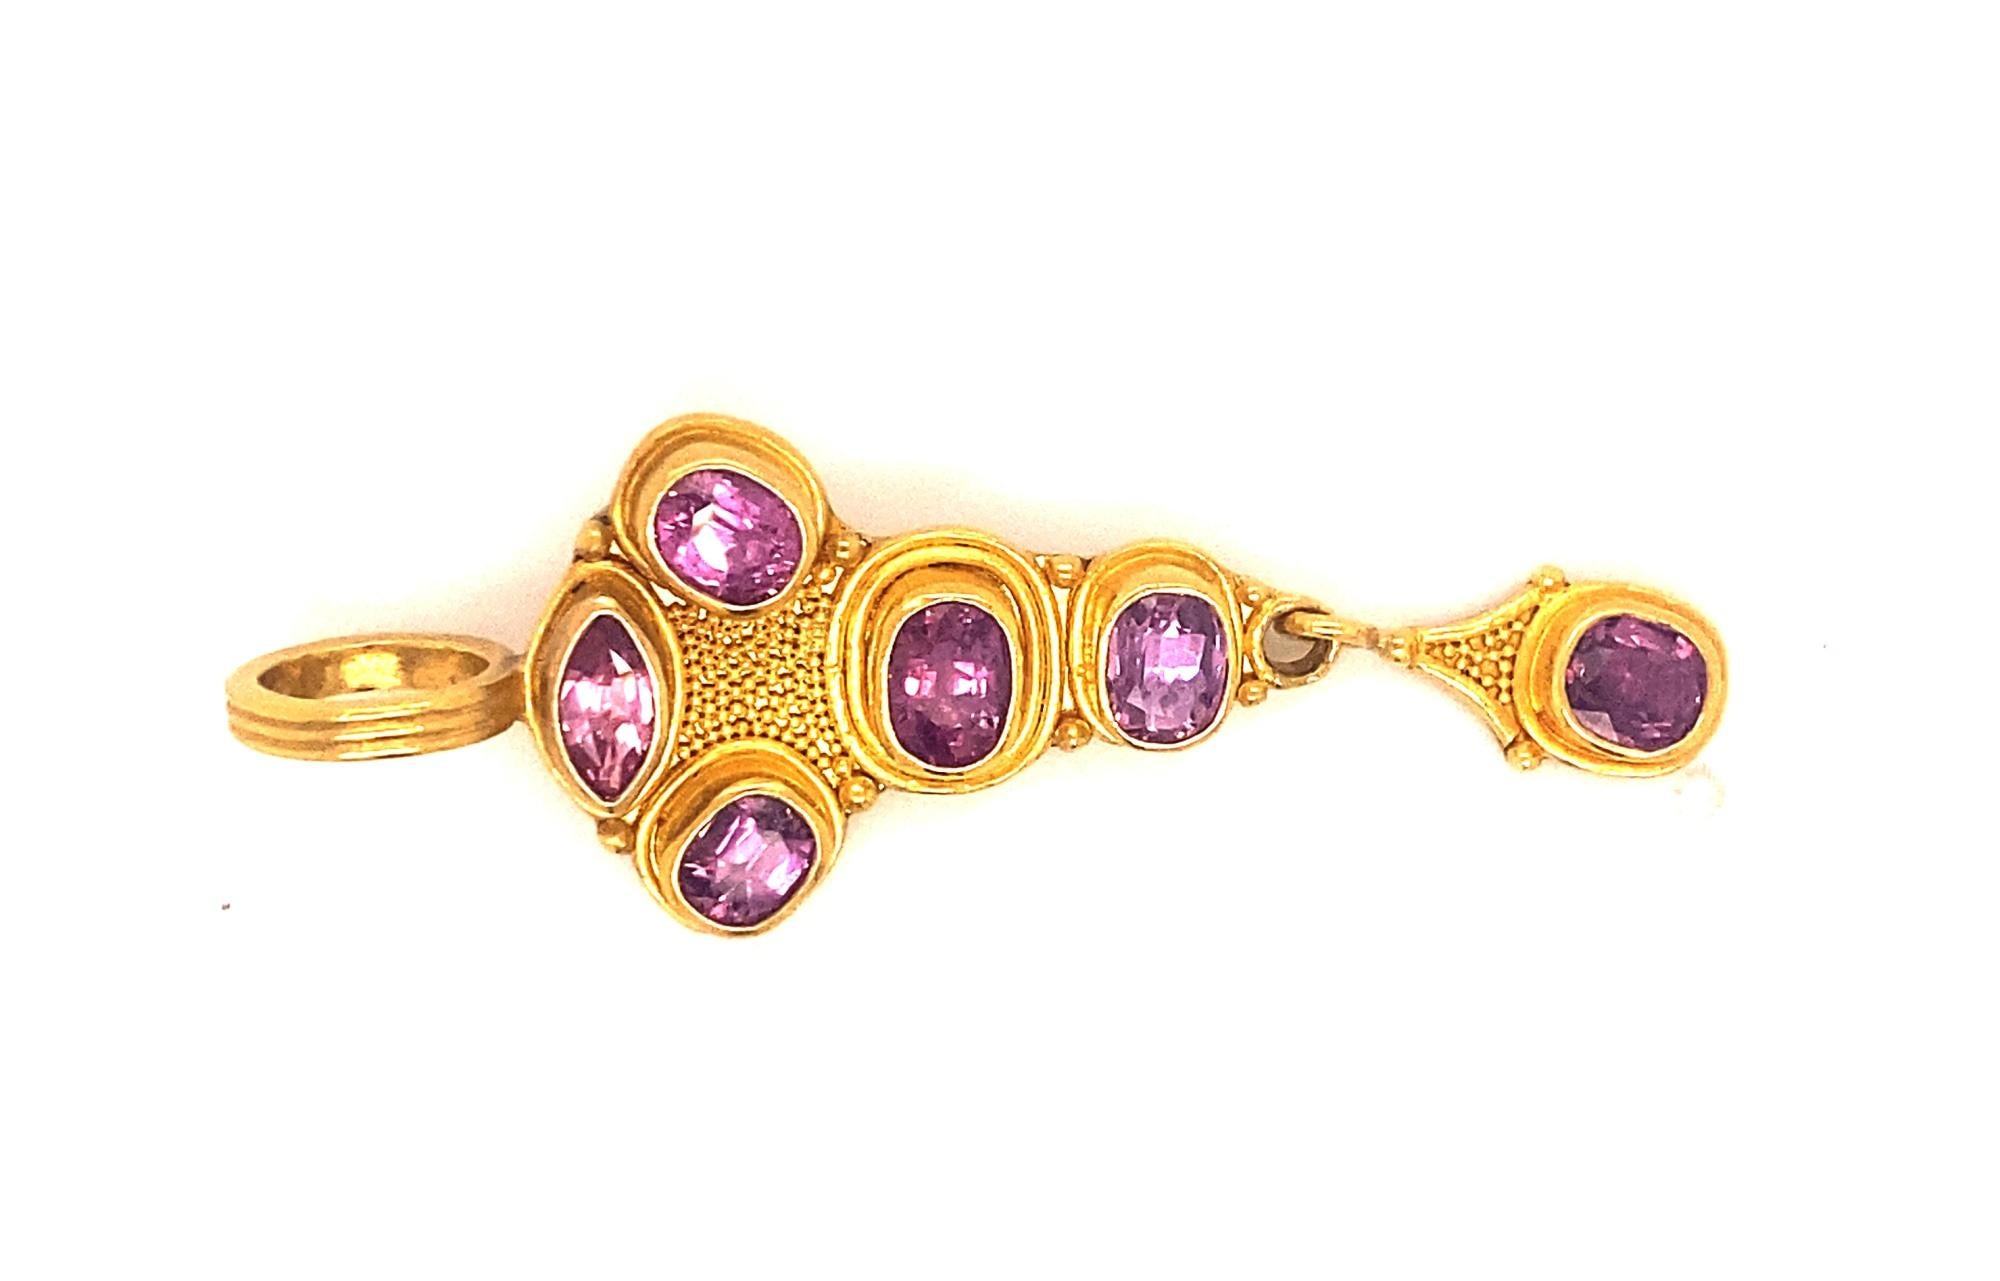 This is a beautiful vintage Reinstein Ross pendant set in 22k yellow gold with oval and marquise shape cut pink tourmalines.  The pendant has gold beading with a large bail.  The 6 pink tourmalines are oval and marquise shaped with amazing color and